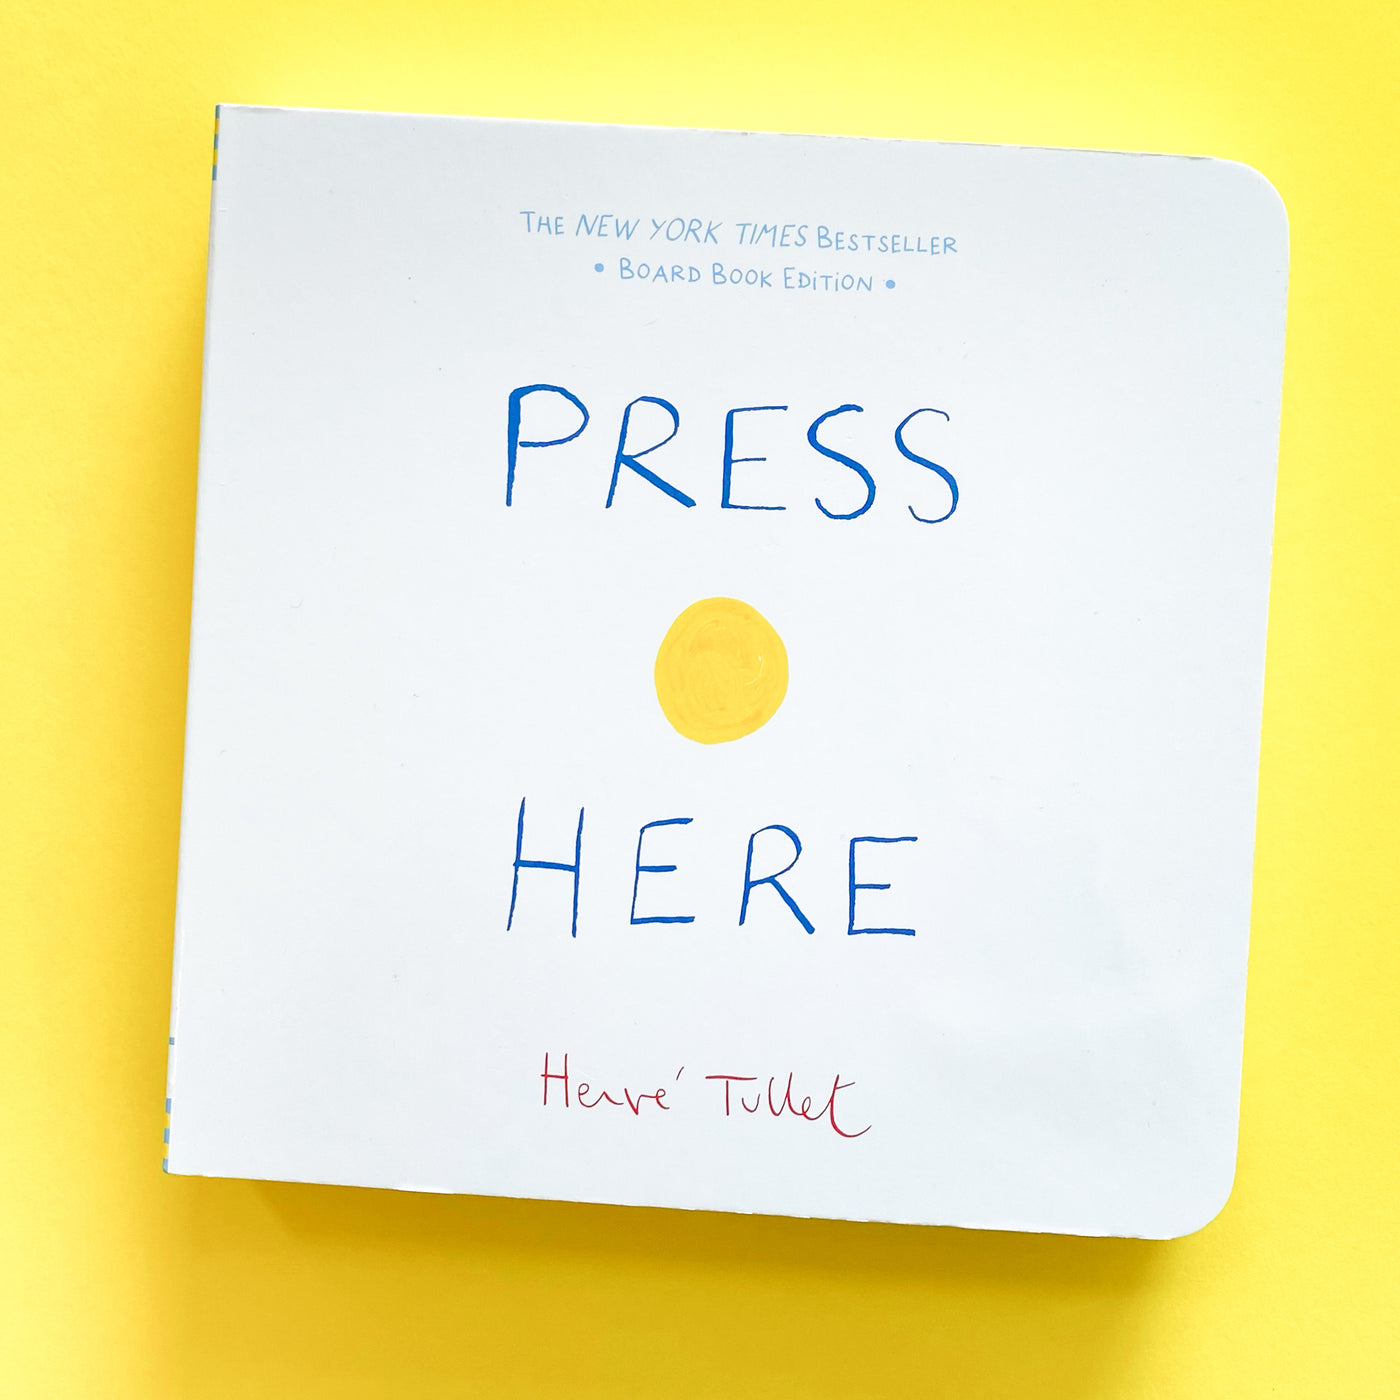 Press Here Board Book by Herve Tullet